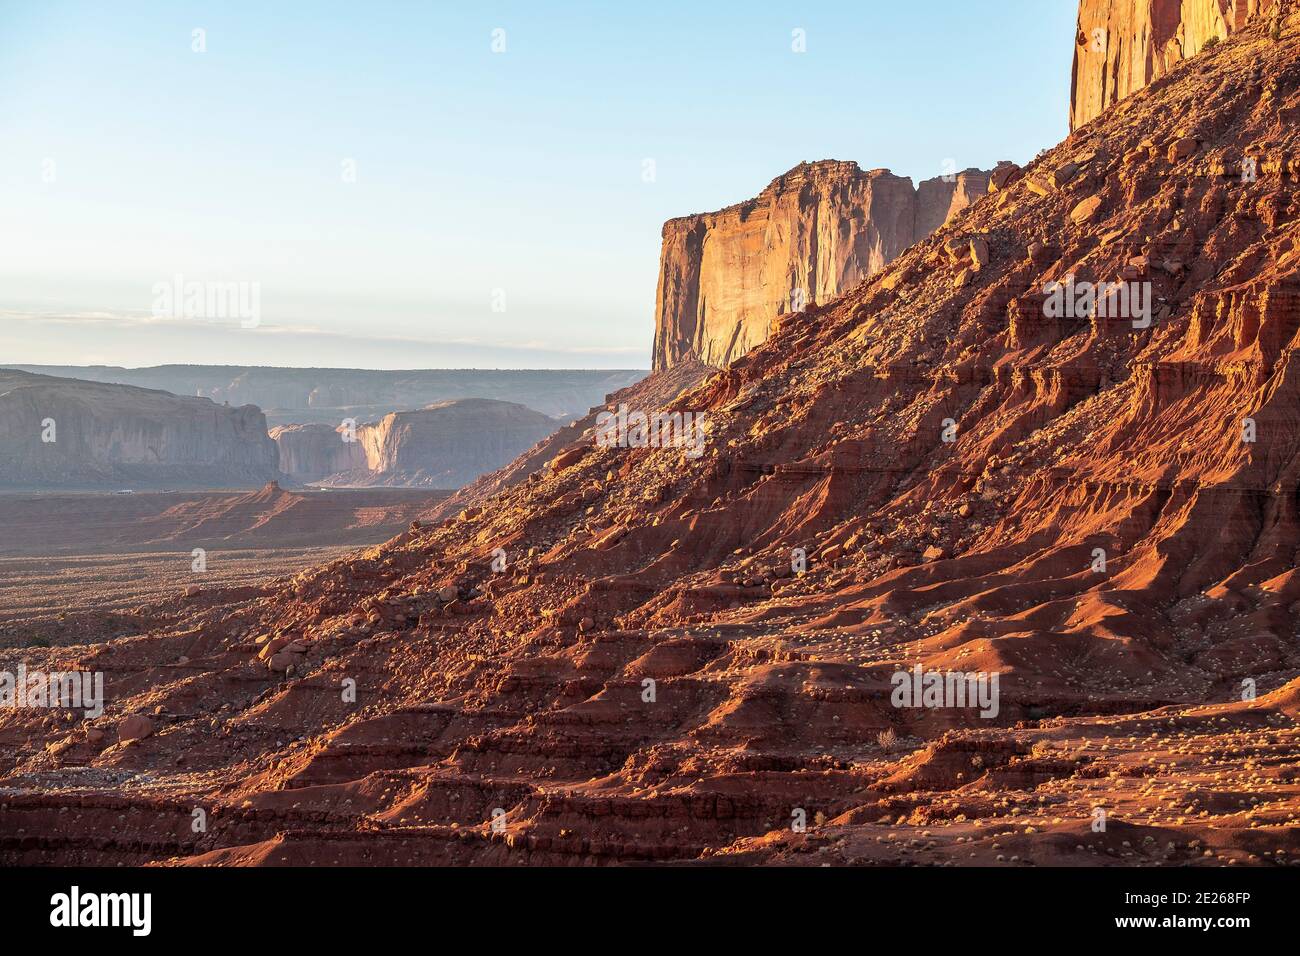 Sunrise light on the Mitchell Mesa rock formation in Monument Valley Navajo Tribal Park which straddles the Arizona and Utah state line, USA Stock Photo